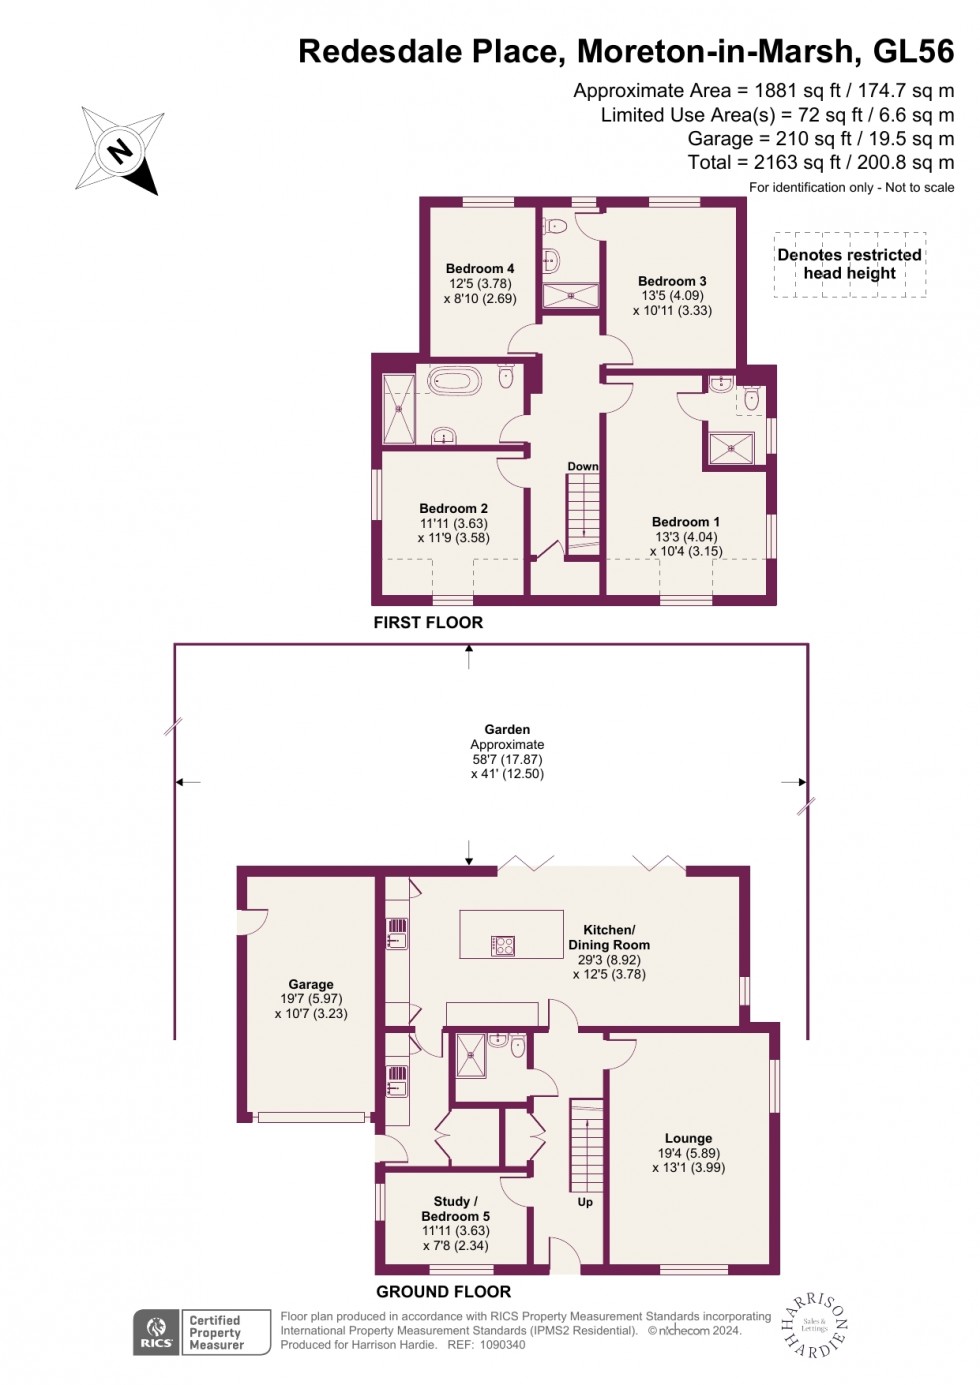 Floorplan for Redesdale Place, Moreton-In-Marsh, GL56